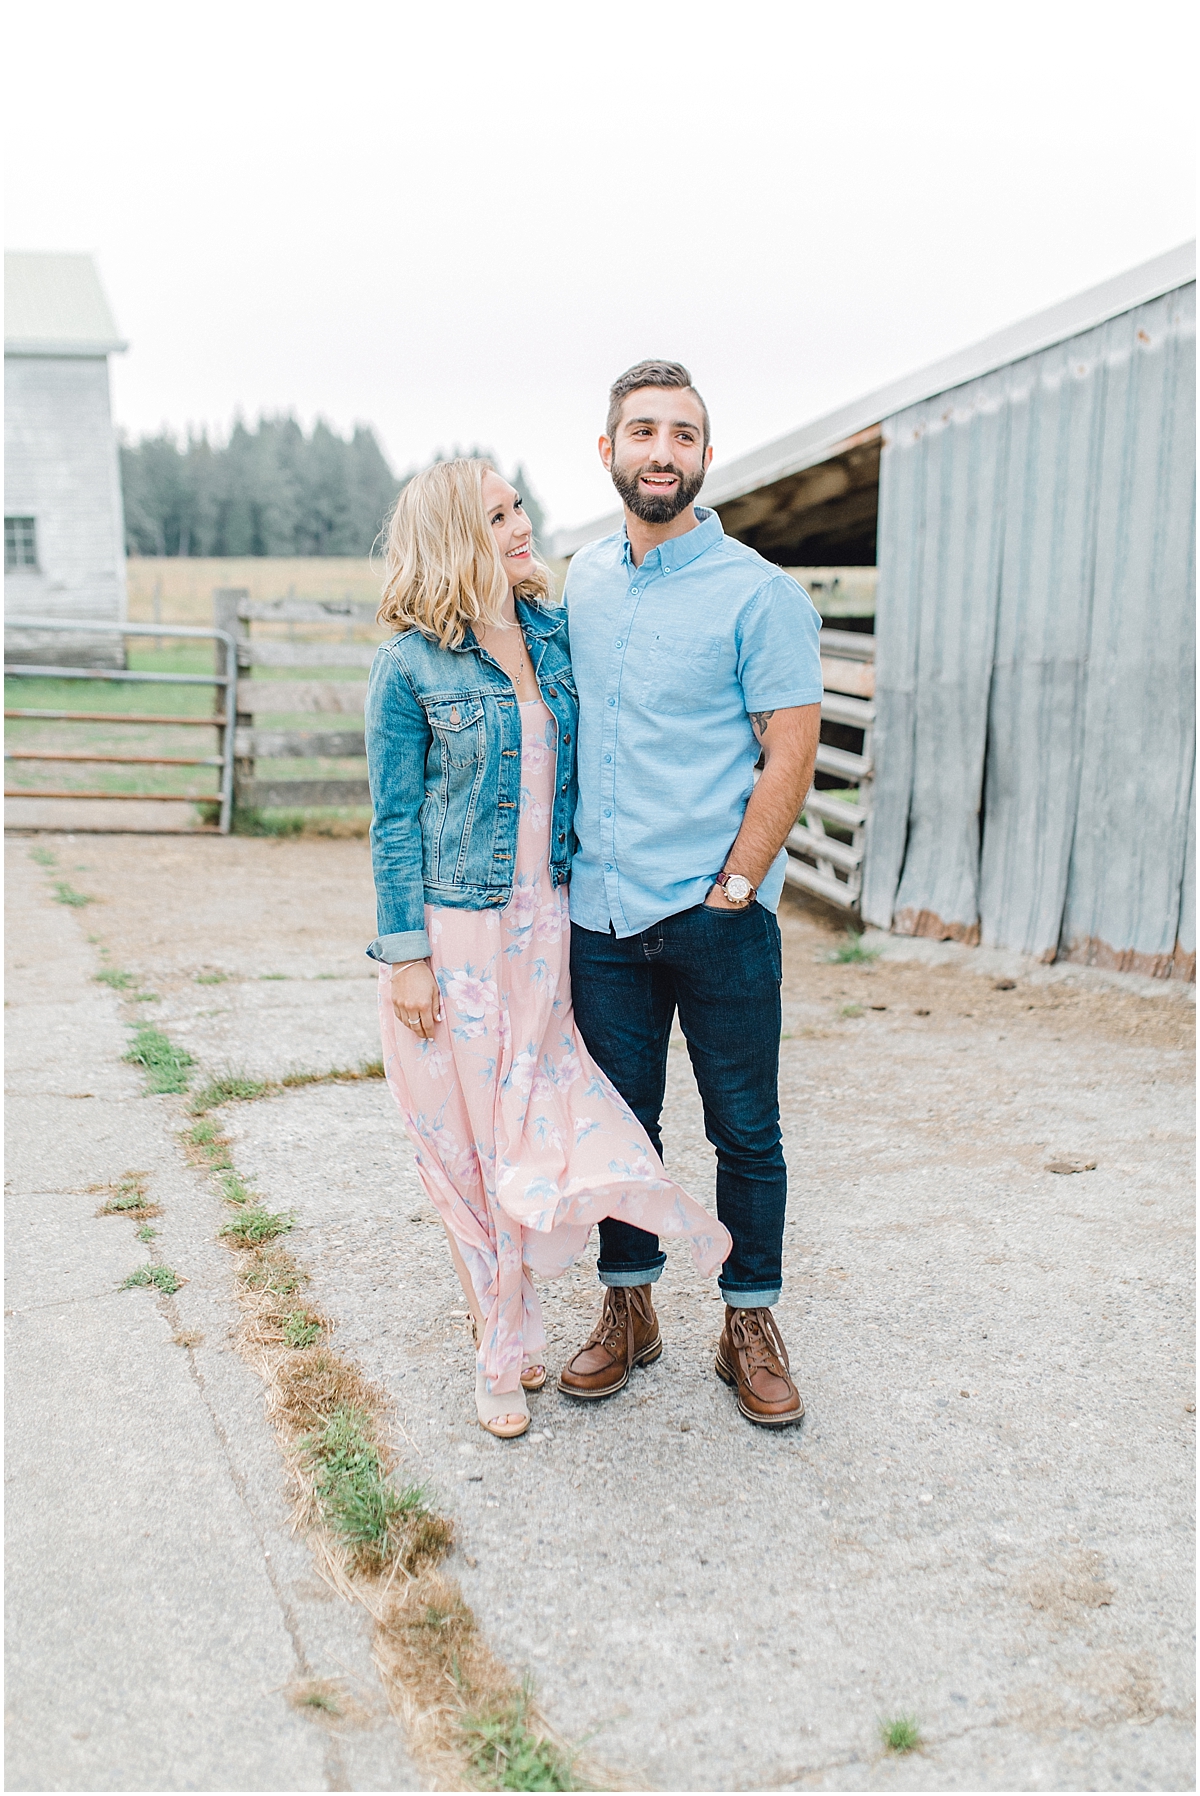 Emma Rose Company | PNW Engagement Session | What to Wear for Pictures | Rose Ranch Engagement | Sunset | Kindred Presets | Seattle Wedding Photographer Light and Airy_0242.jpg